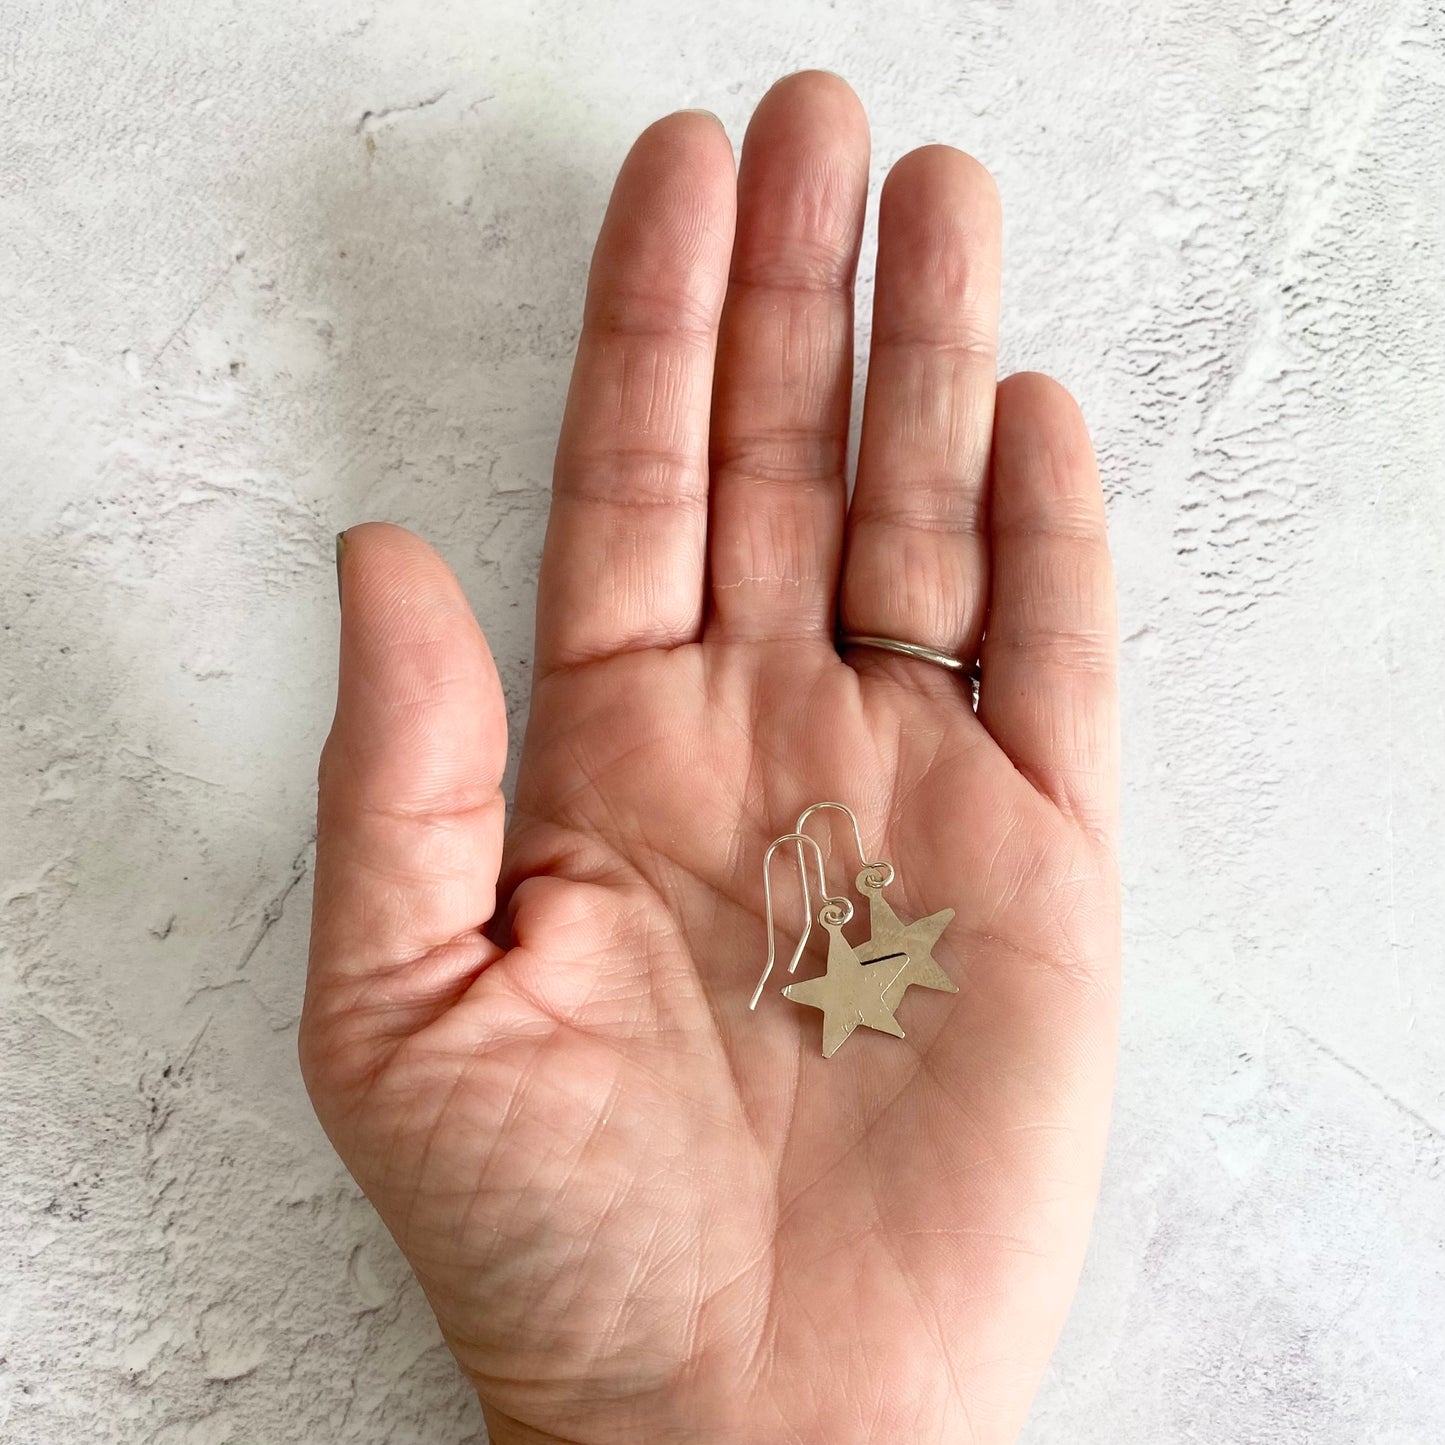 Tiny Hammered Silver Tone Star Earrings